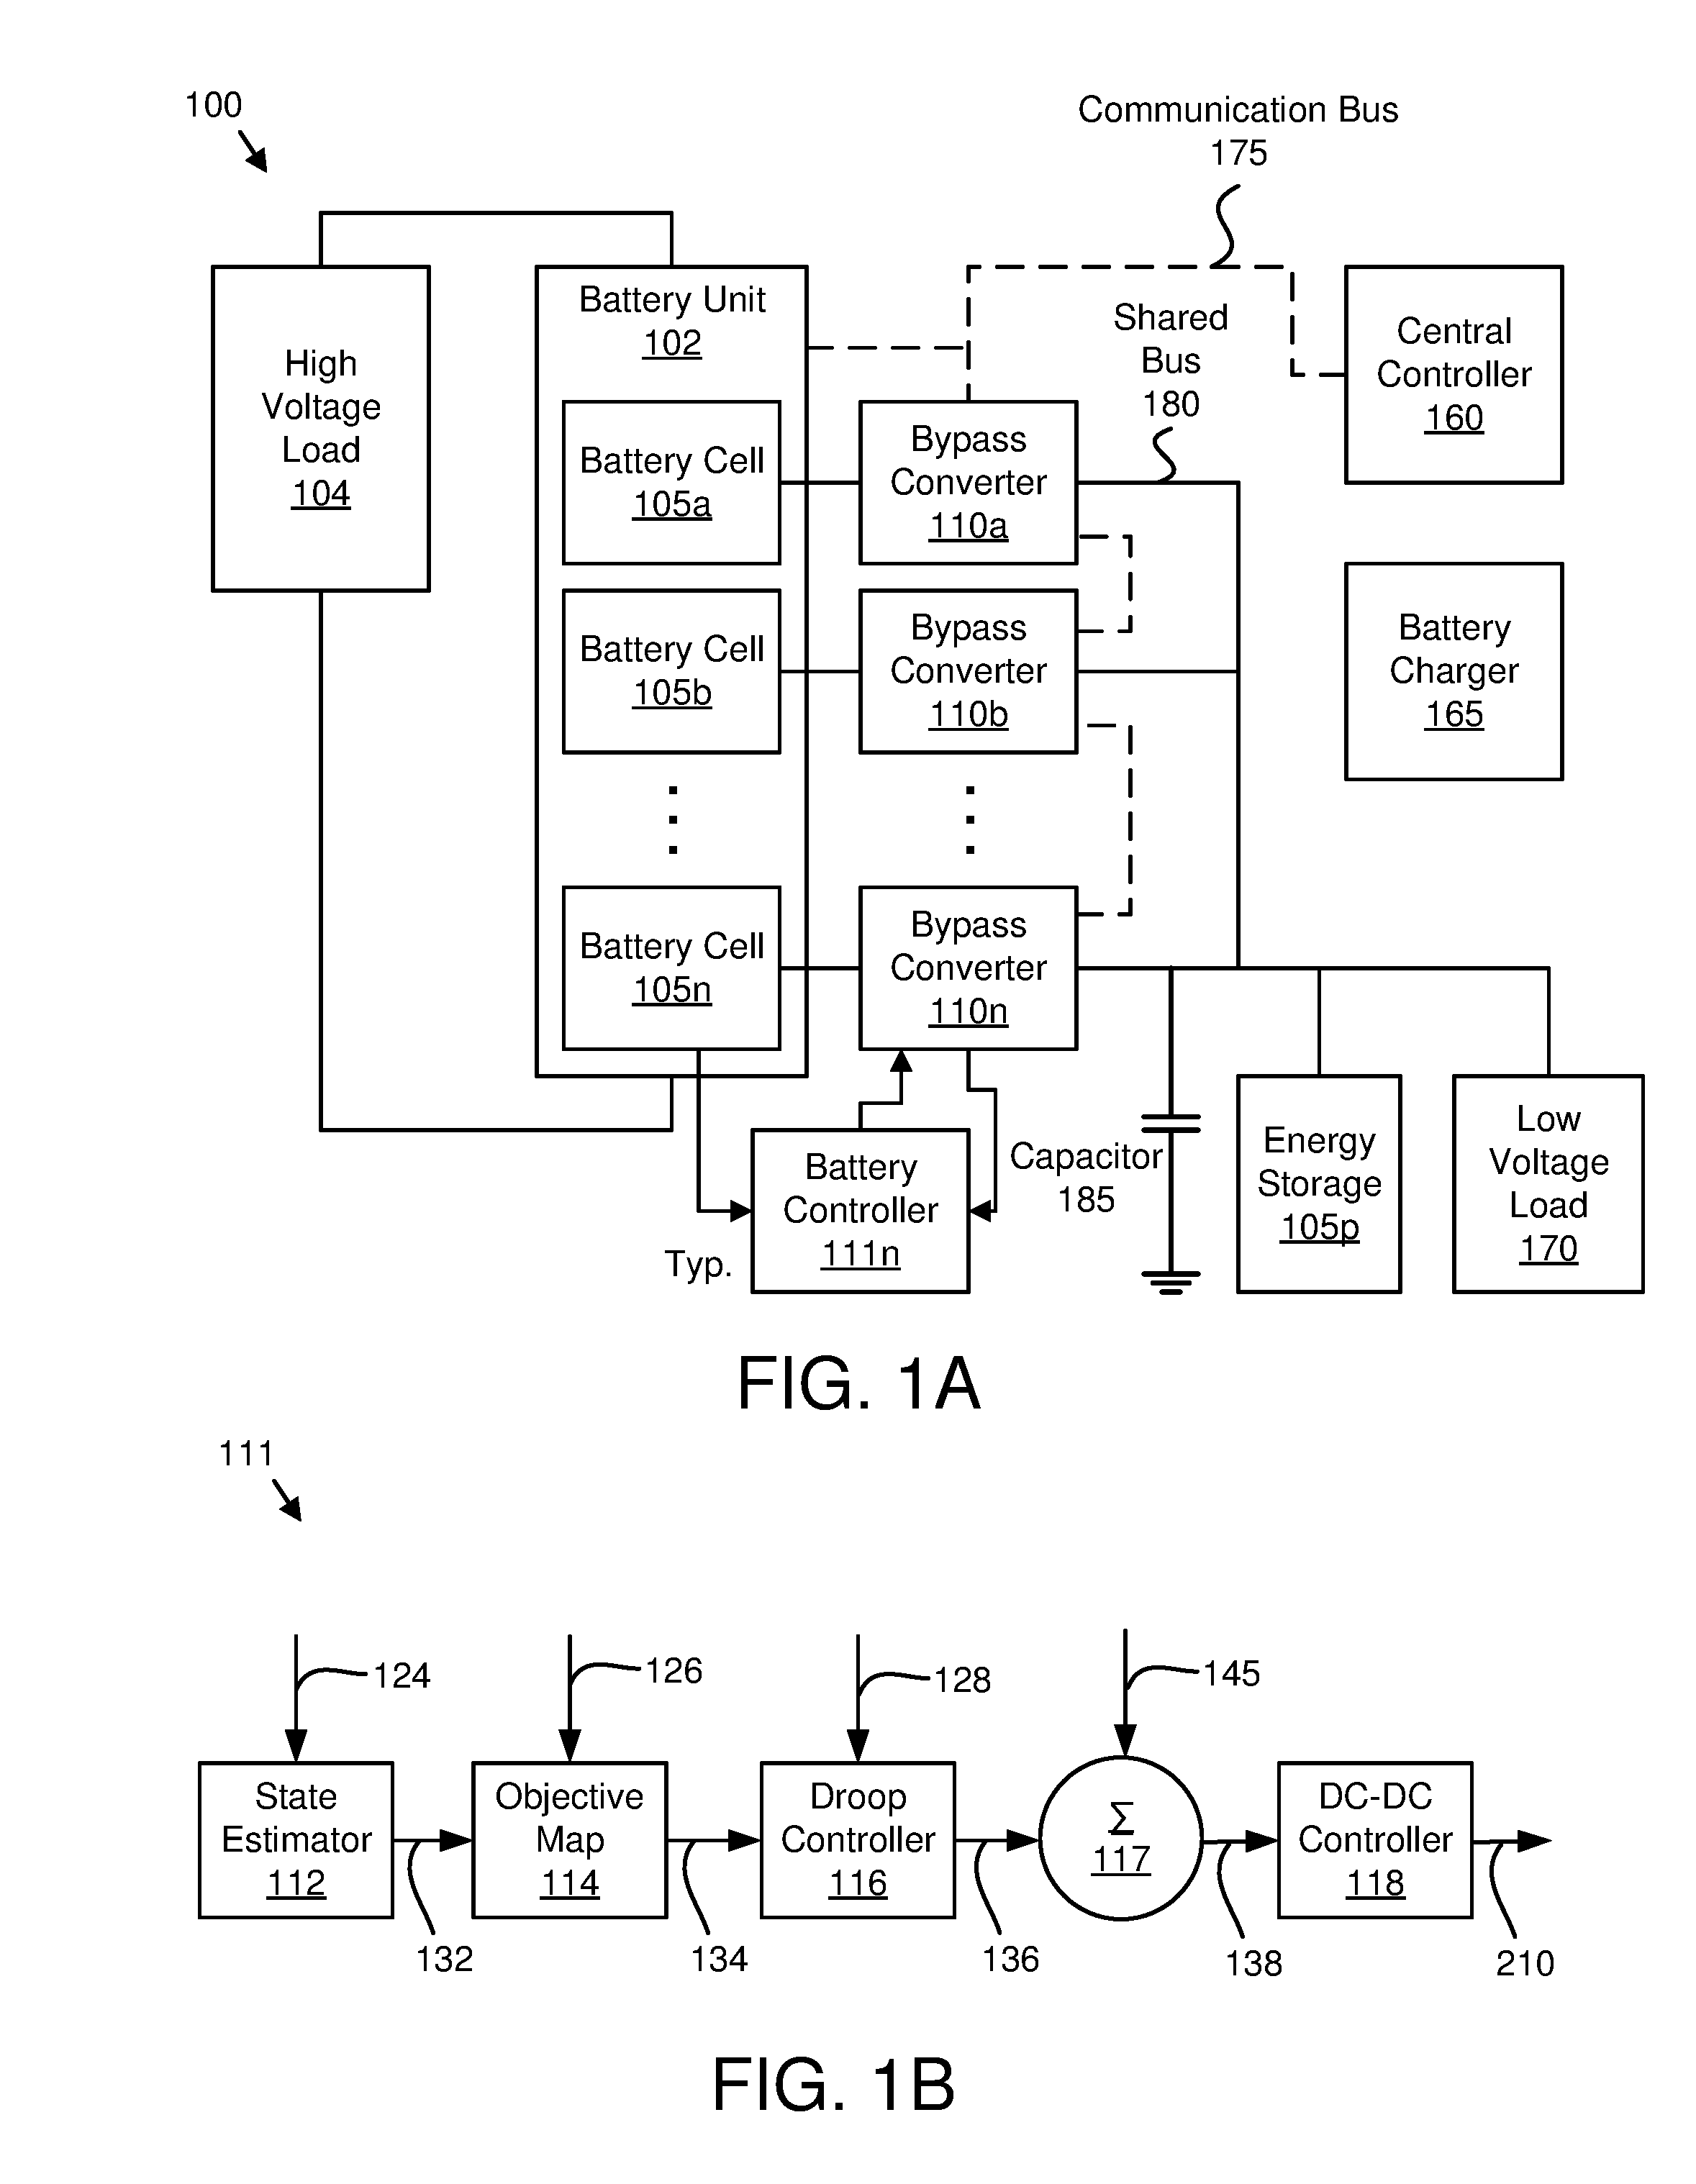 Model predictive control and optimization for battery charging and discharging